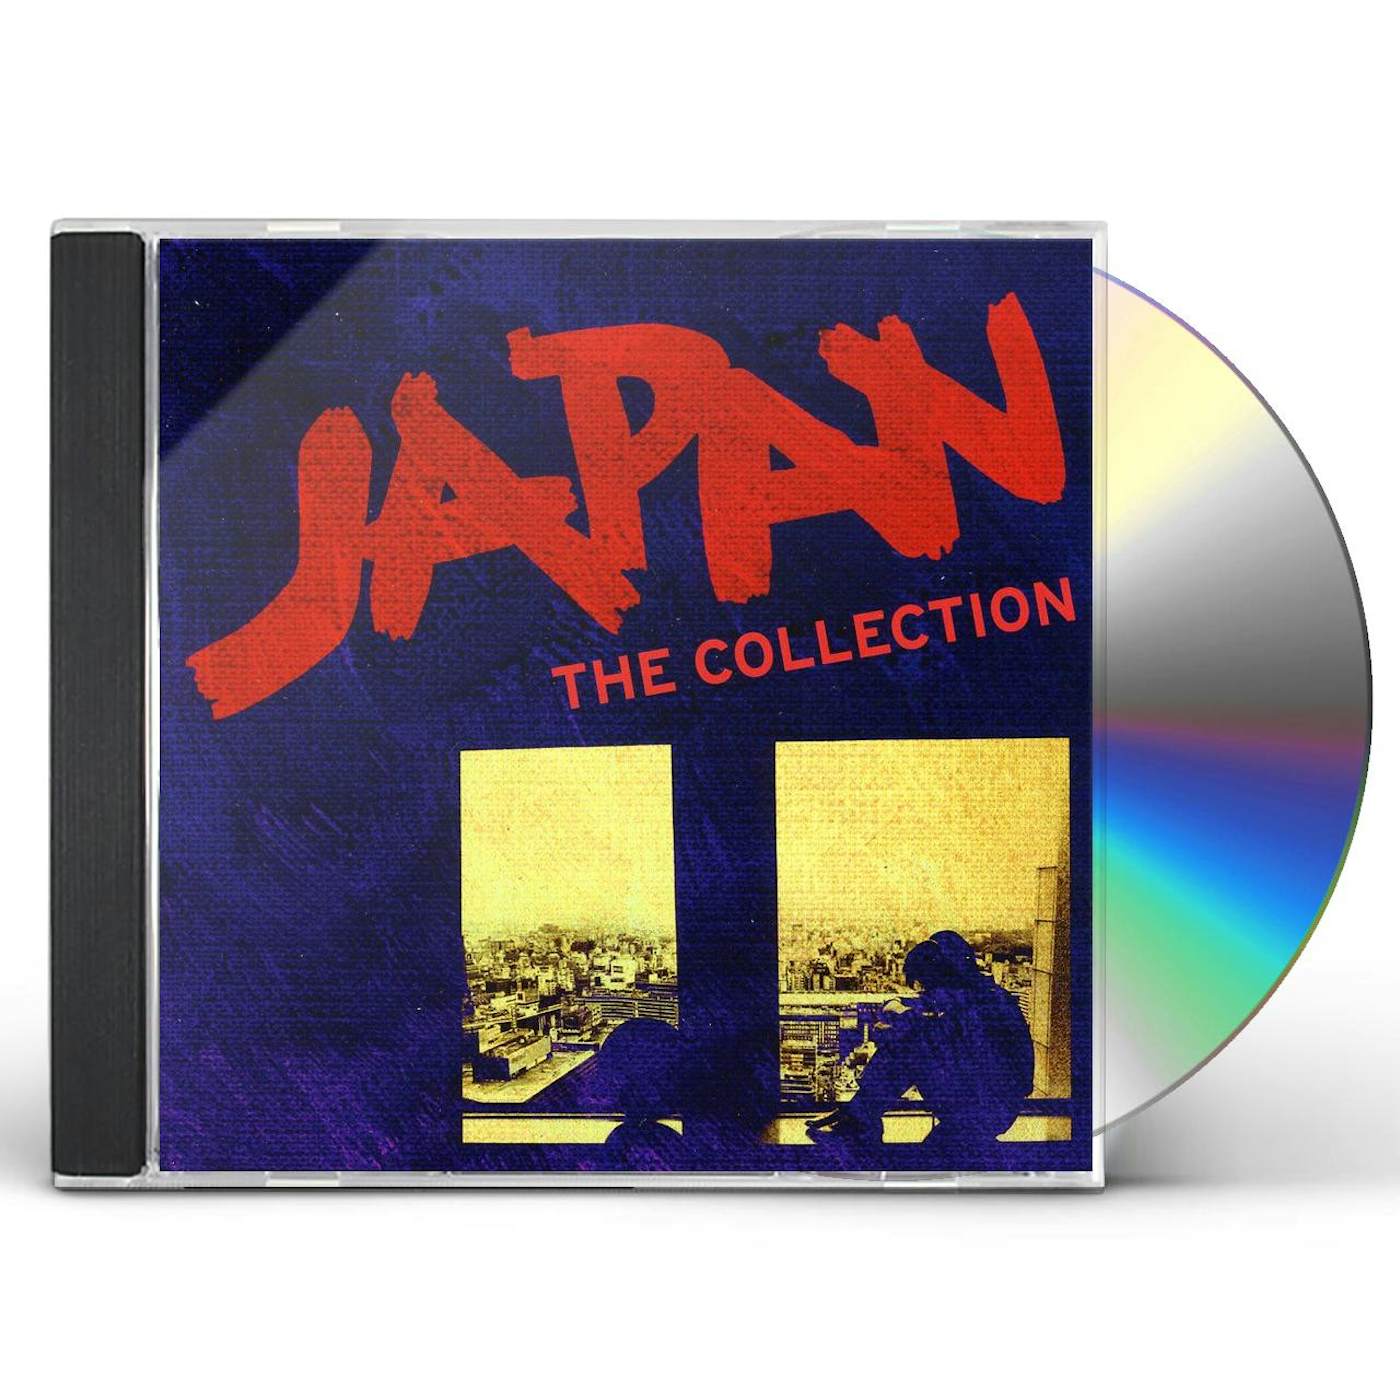 Japan COLLECTION CD